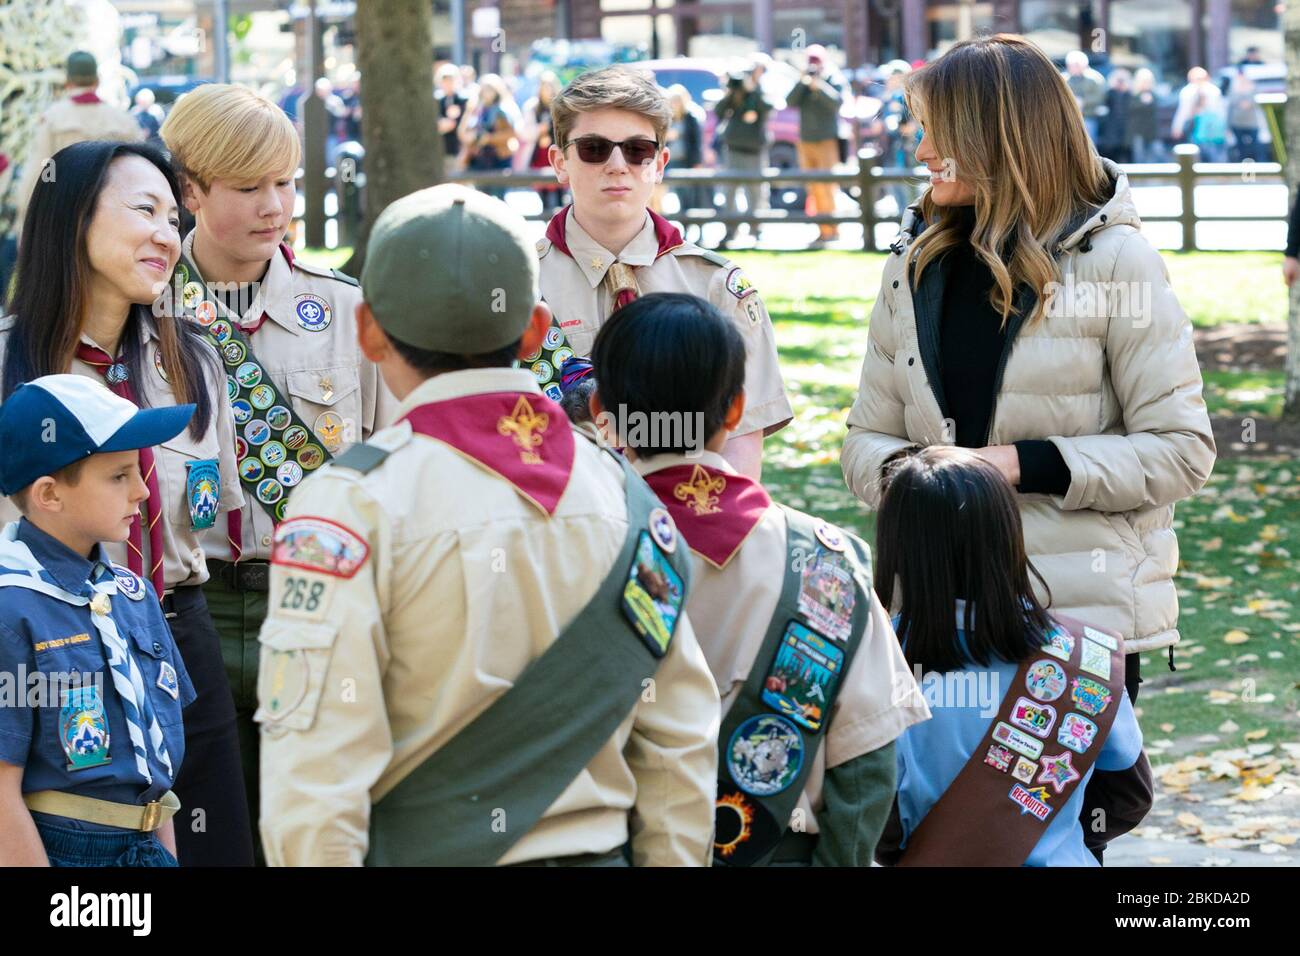 First Lady Melania Trump talks with Jackson, Wyoming’s first woman Scoutmaster Mindy Kim-Miller and members of the Boy Scouts and the Girl Scouts at the Antler Arch Thursday, Oct. 3, 2019, at Jackson Hole Town Square in Jackson, Wyo. First Lady Melania Trump's Visit to Wyoming Stock Photo